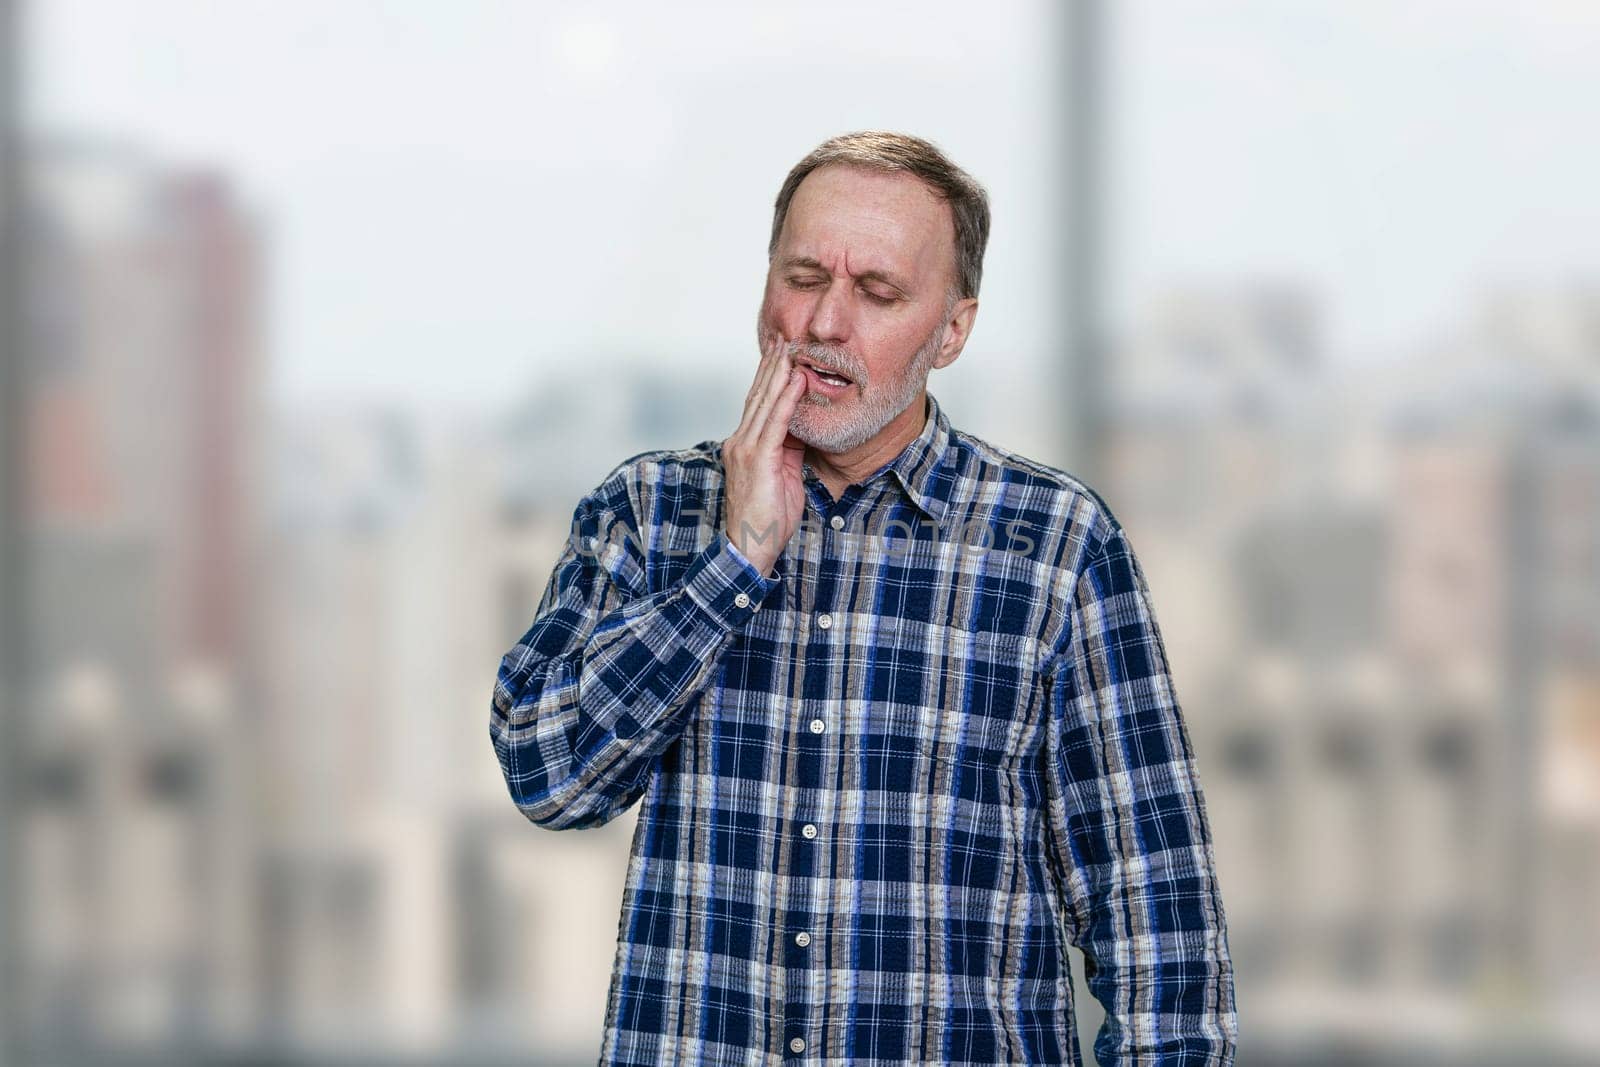 Mature office worker in checkered shirt having toothache. Blurred windows background.